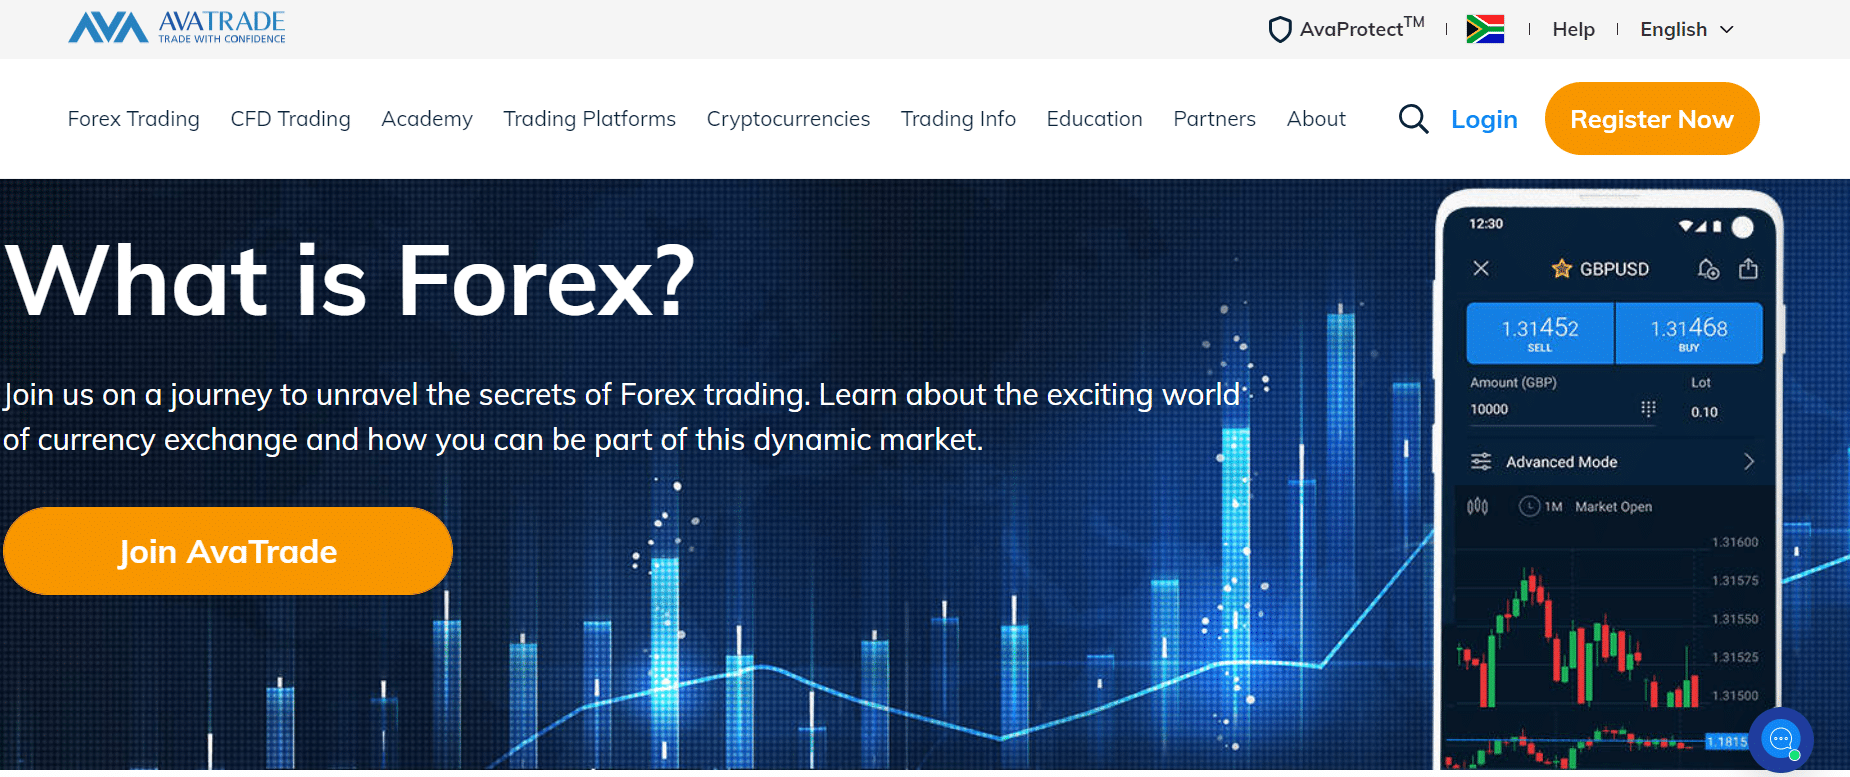 AvaTrade What is Forex